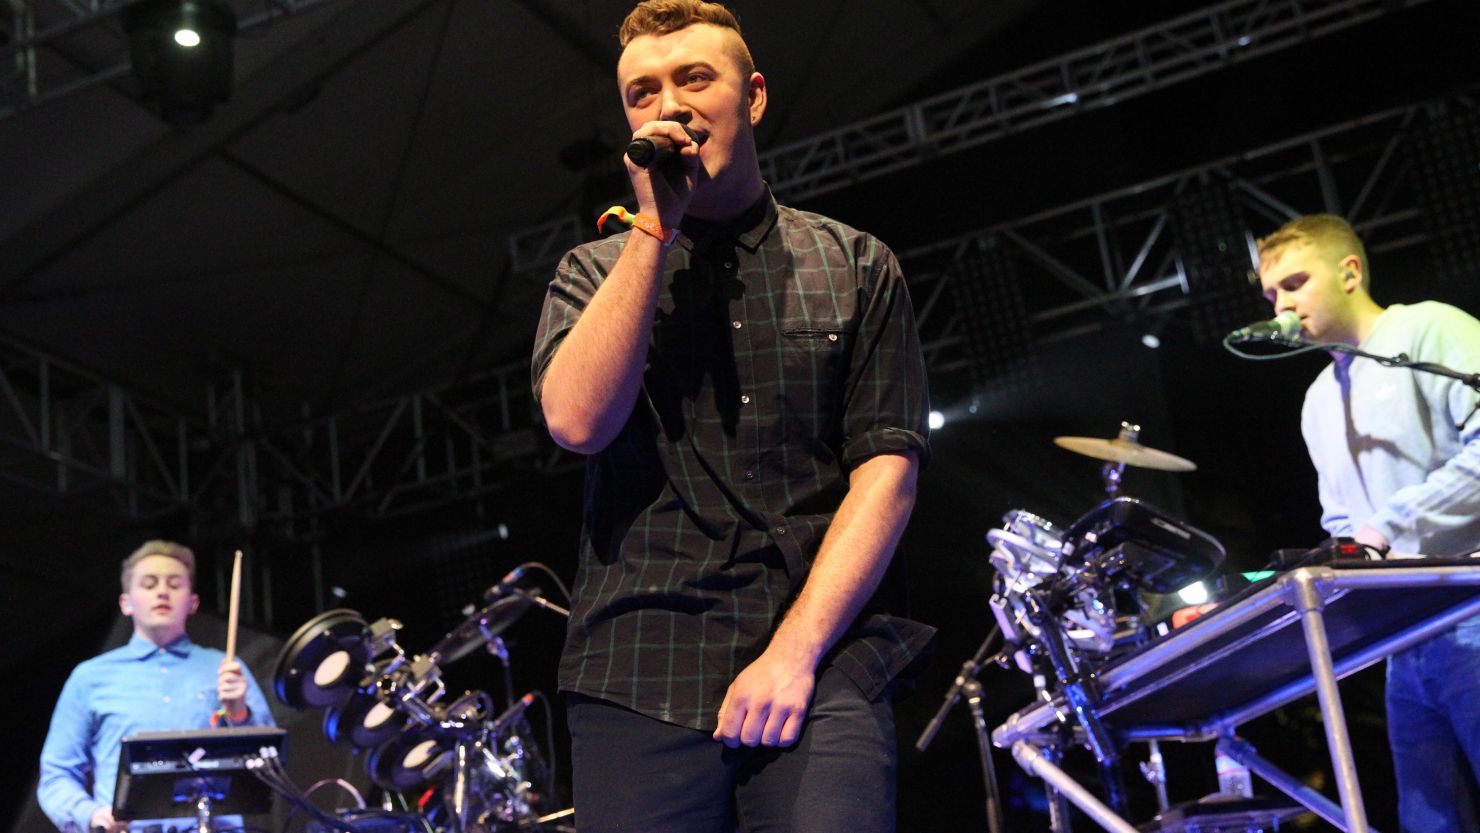 Sam Smith's debut album, "In the Lonely Hour," dropped on June 17. 